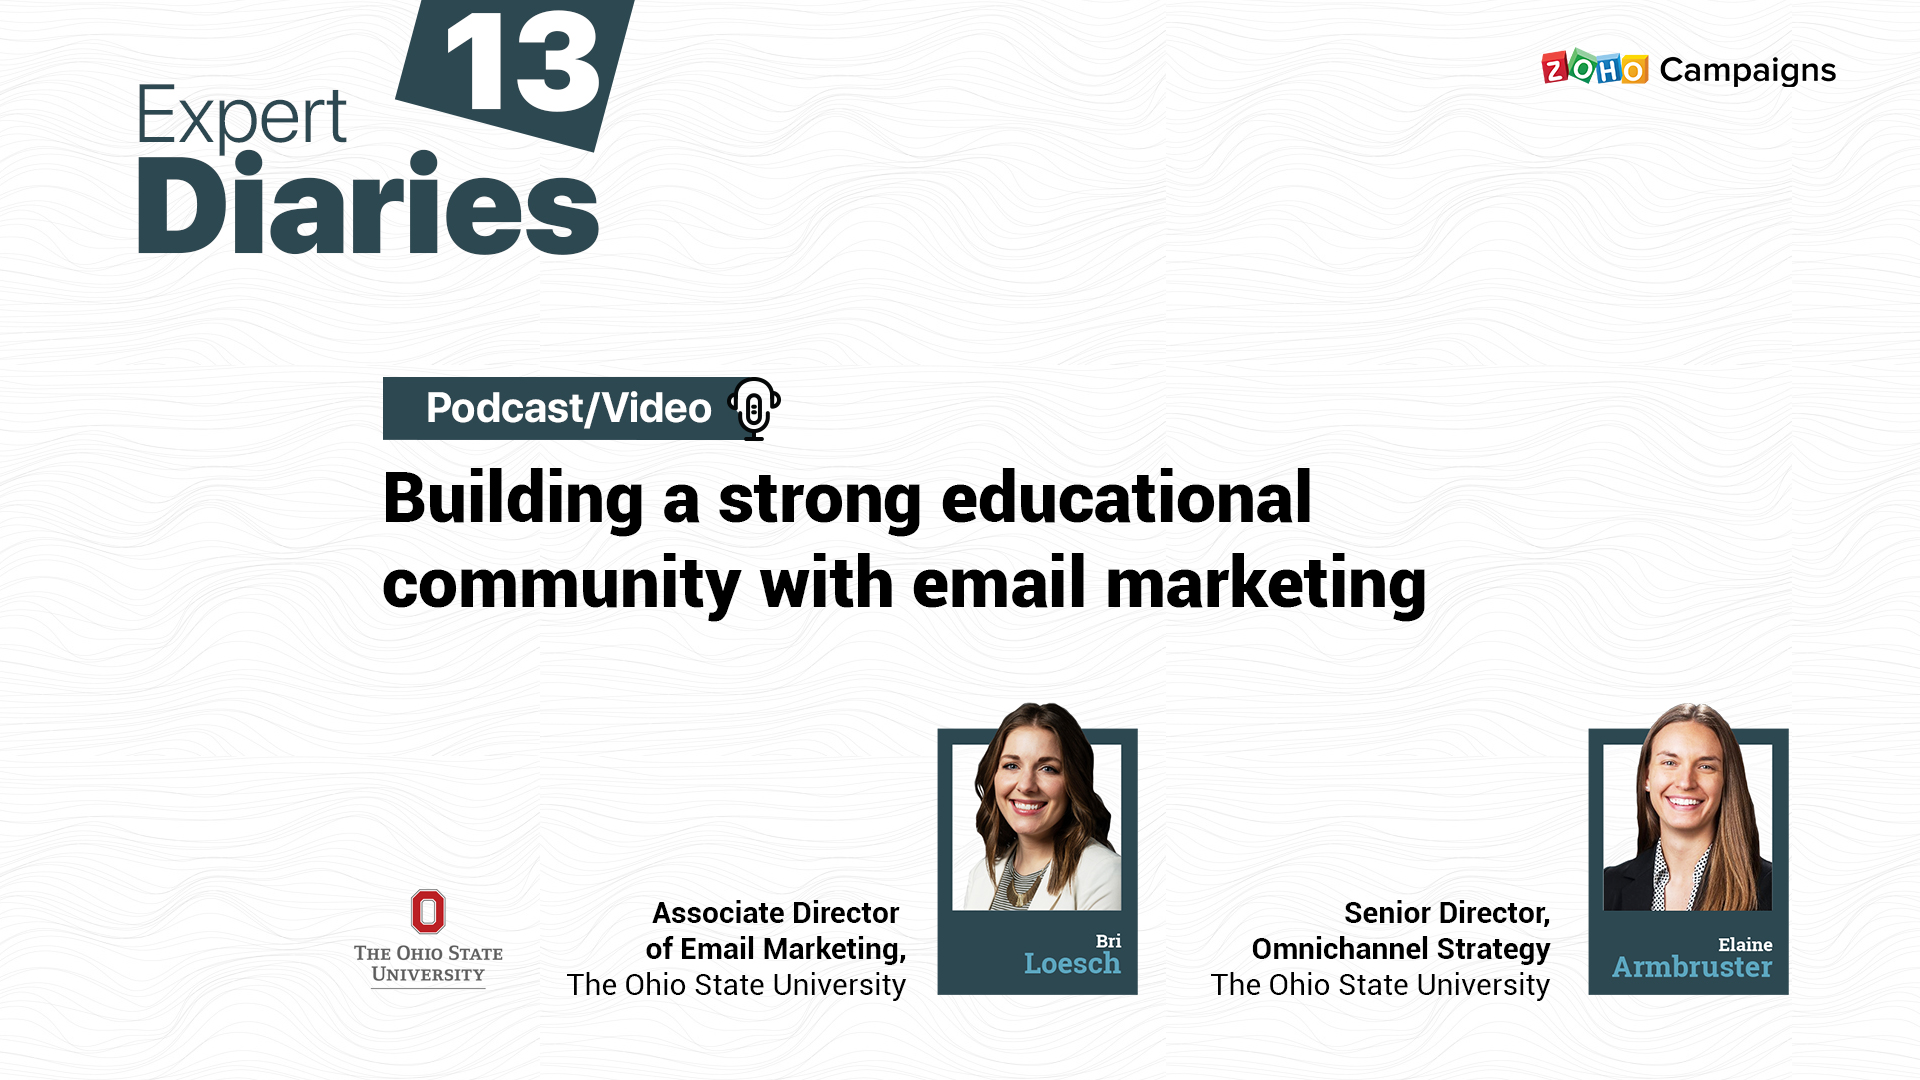 Building a strong educational community with email marketing